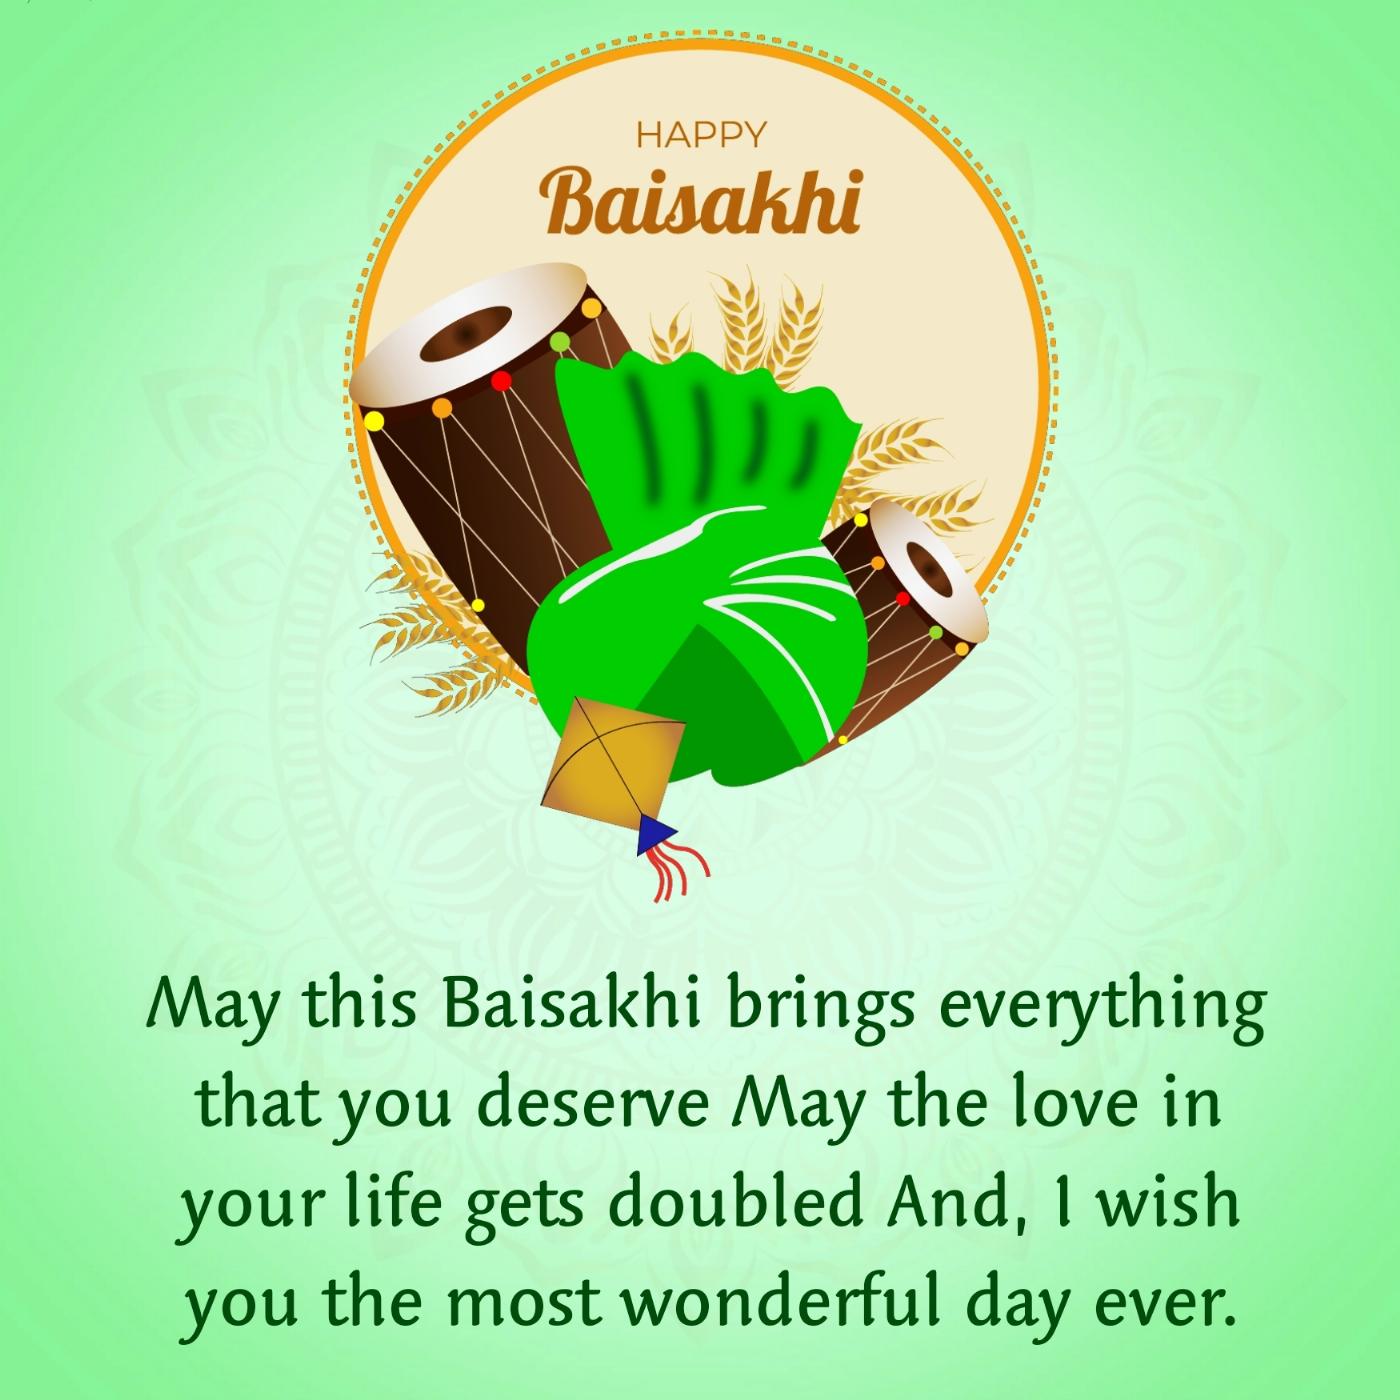 May this Baisakhi brings everything that you deserve